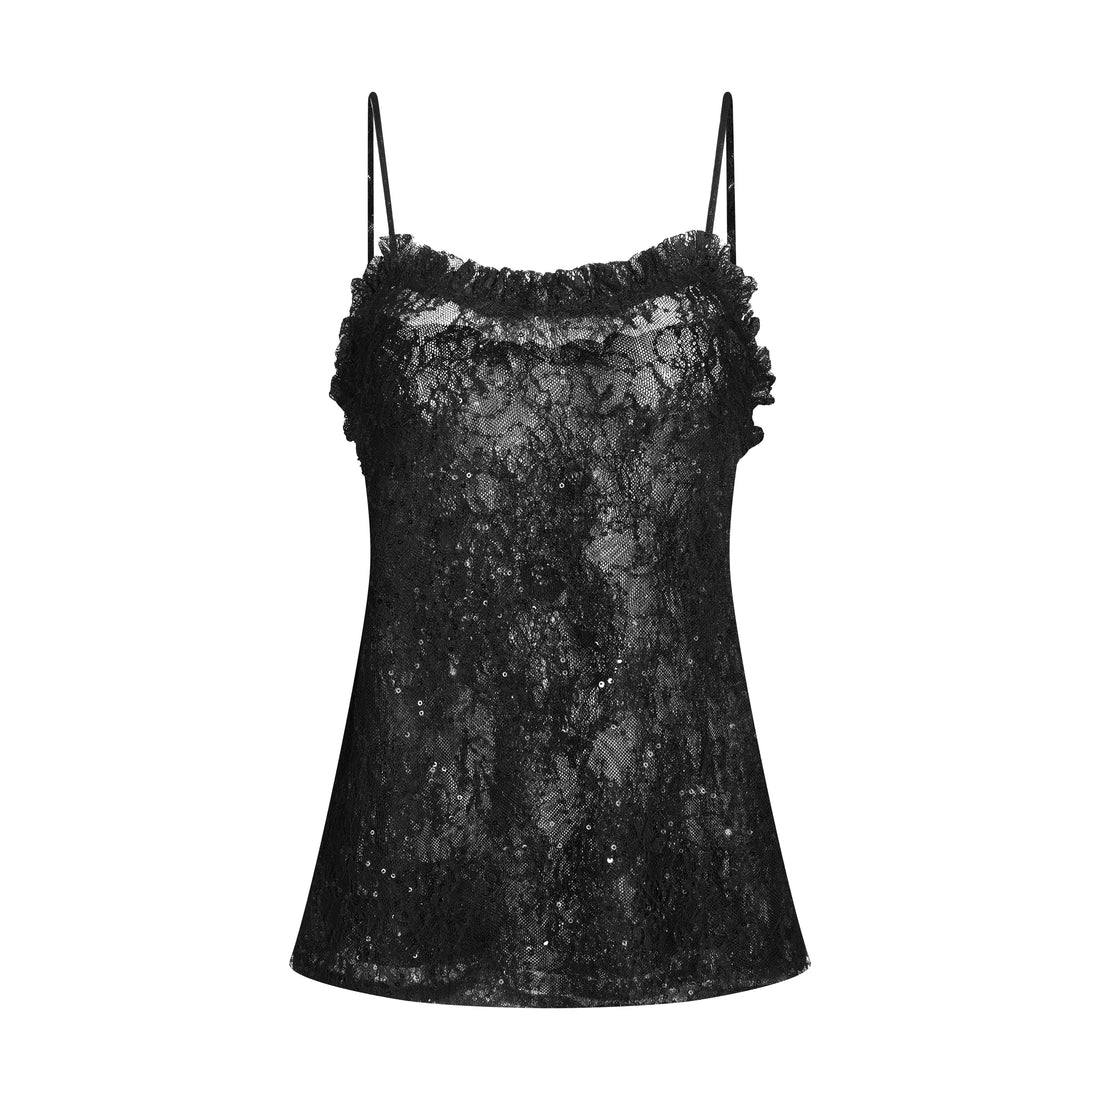 Lace Camisole Top in Black